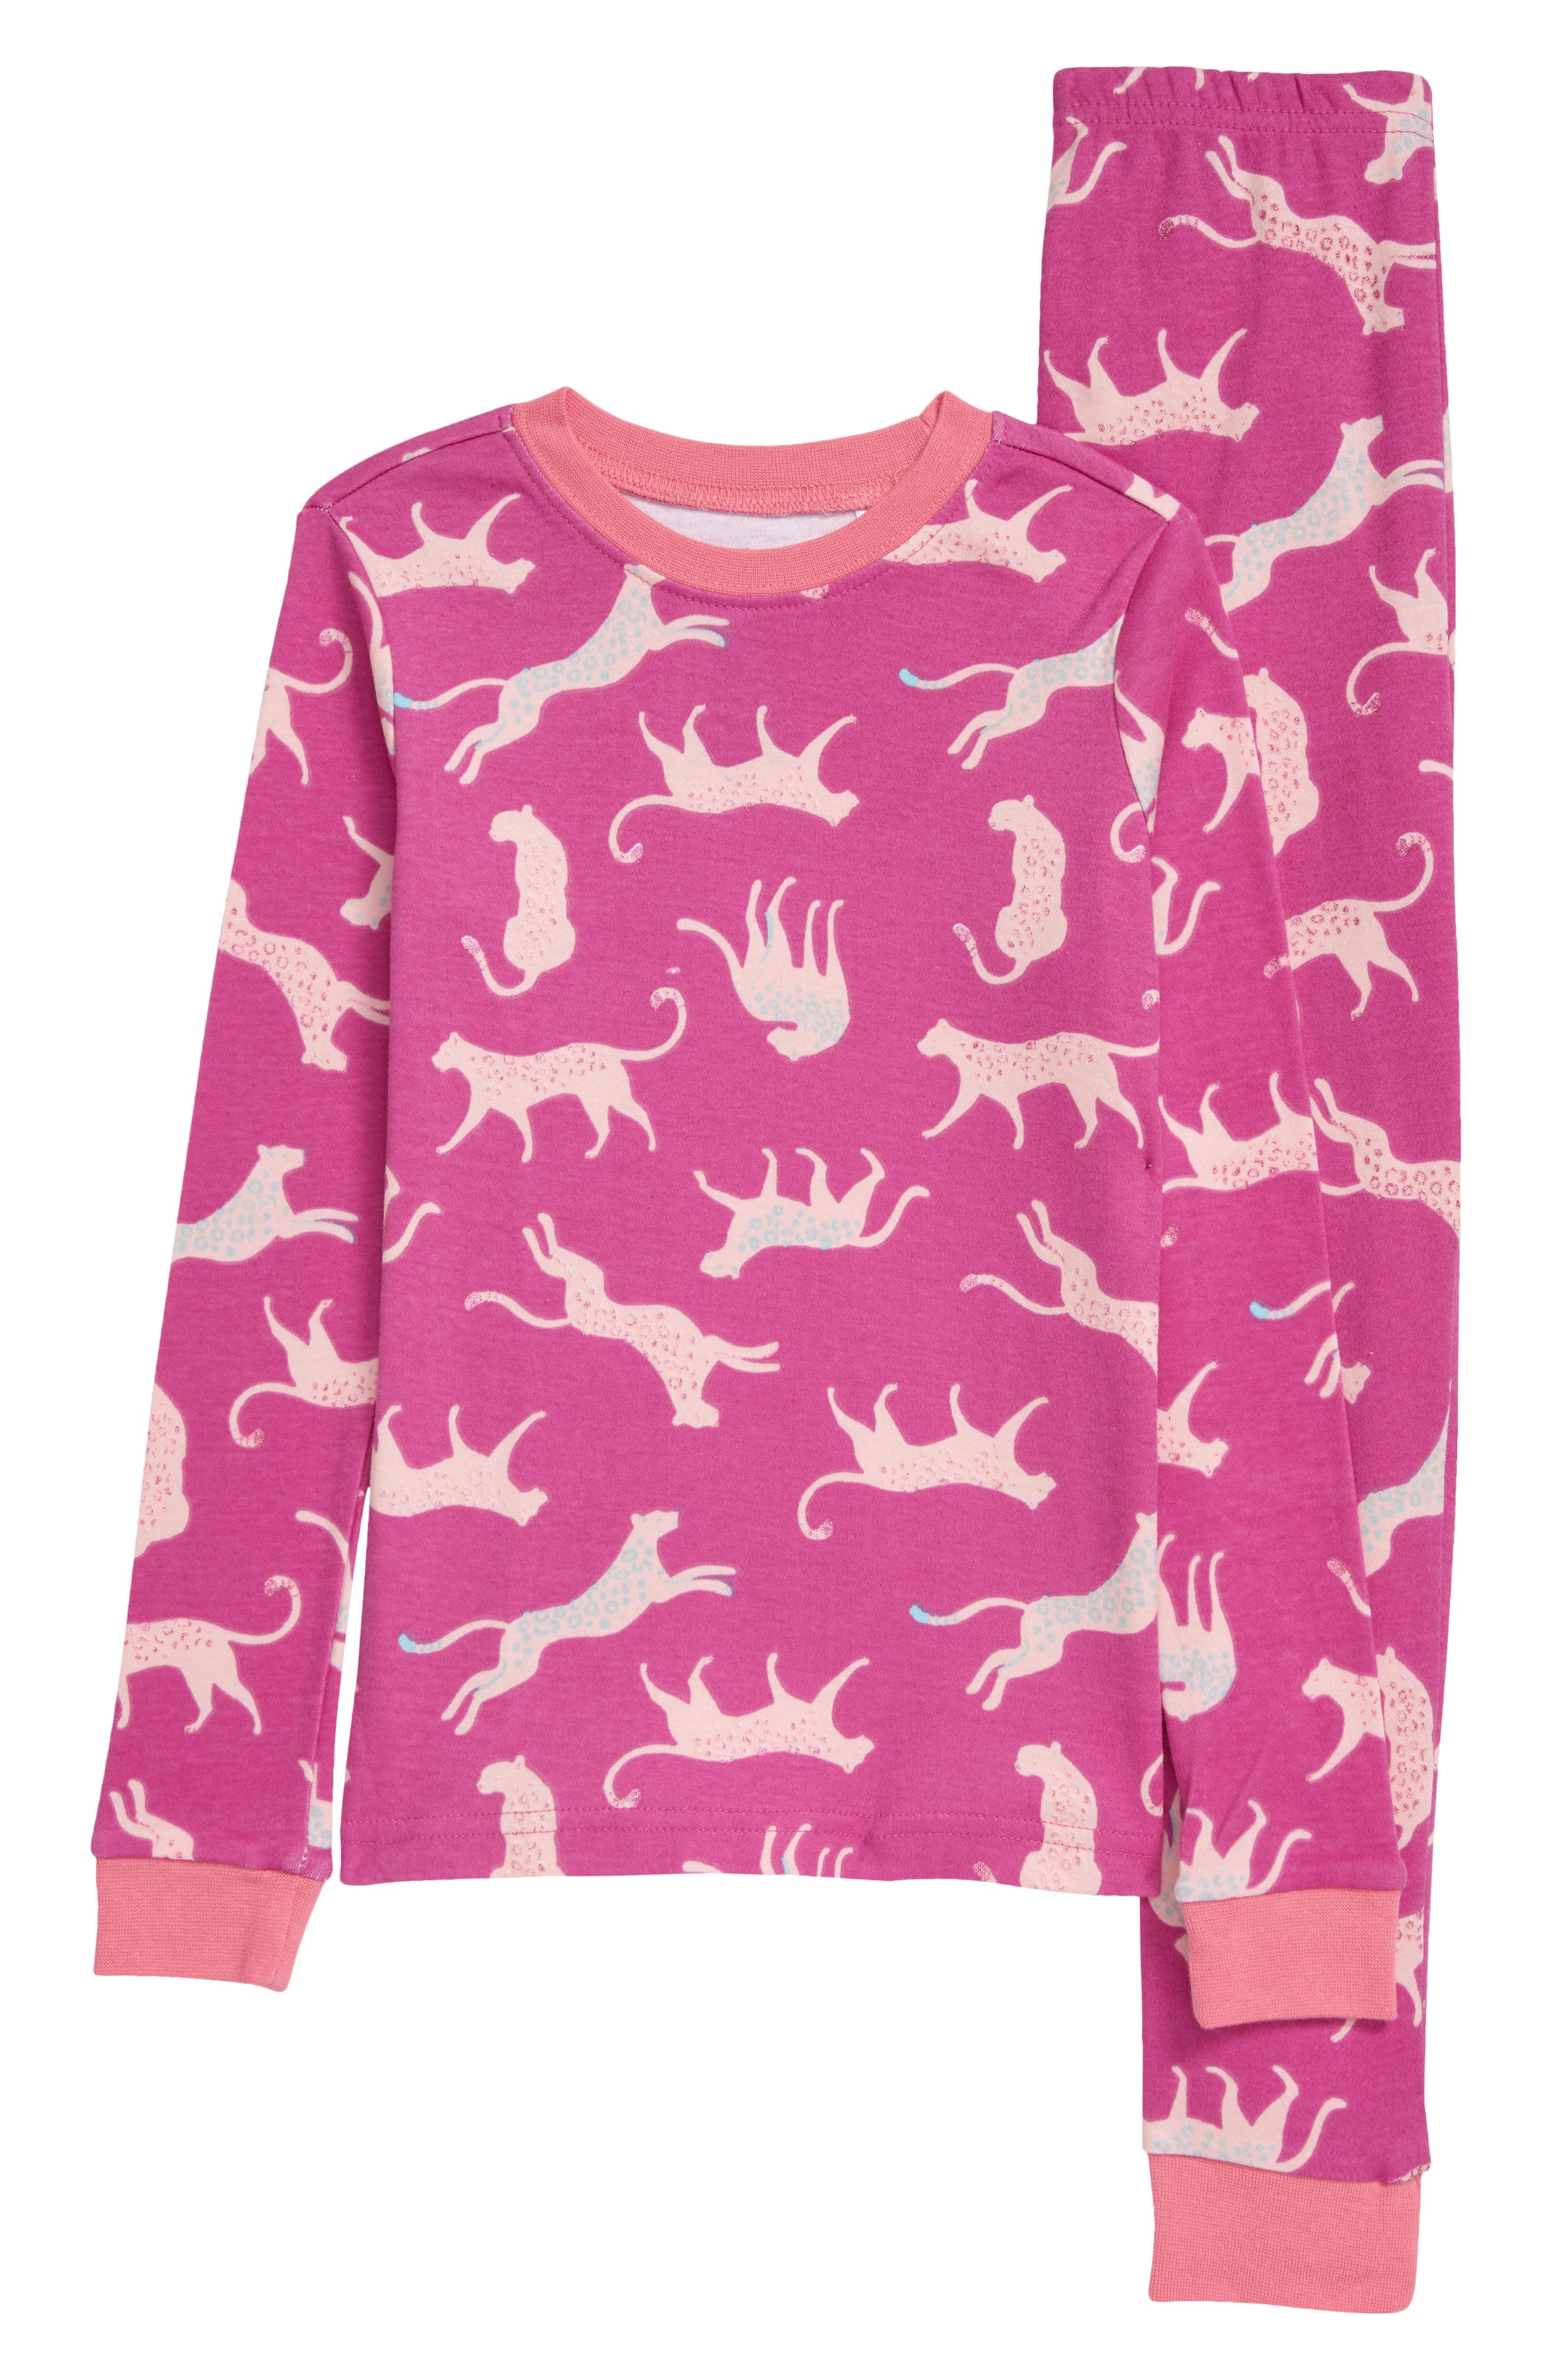 Tucker + Tate Kids' Fitted Two-Piece Pajamas in Purple Orchid Wild Cats